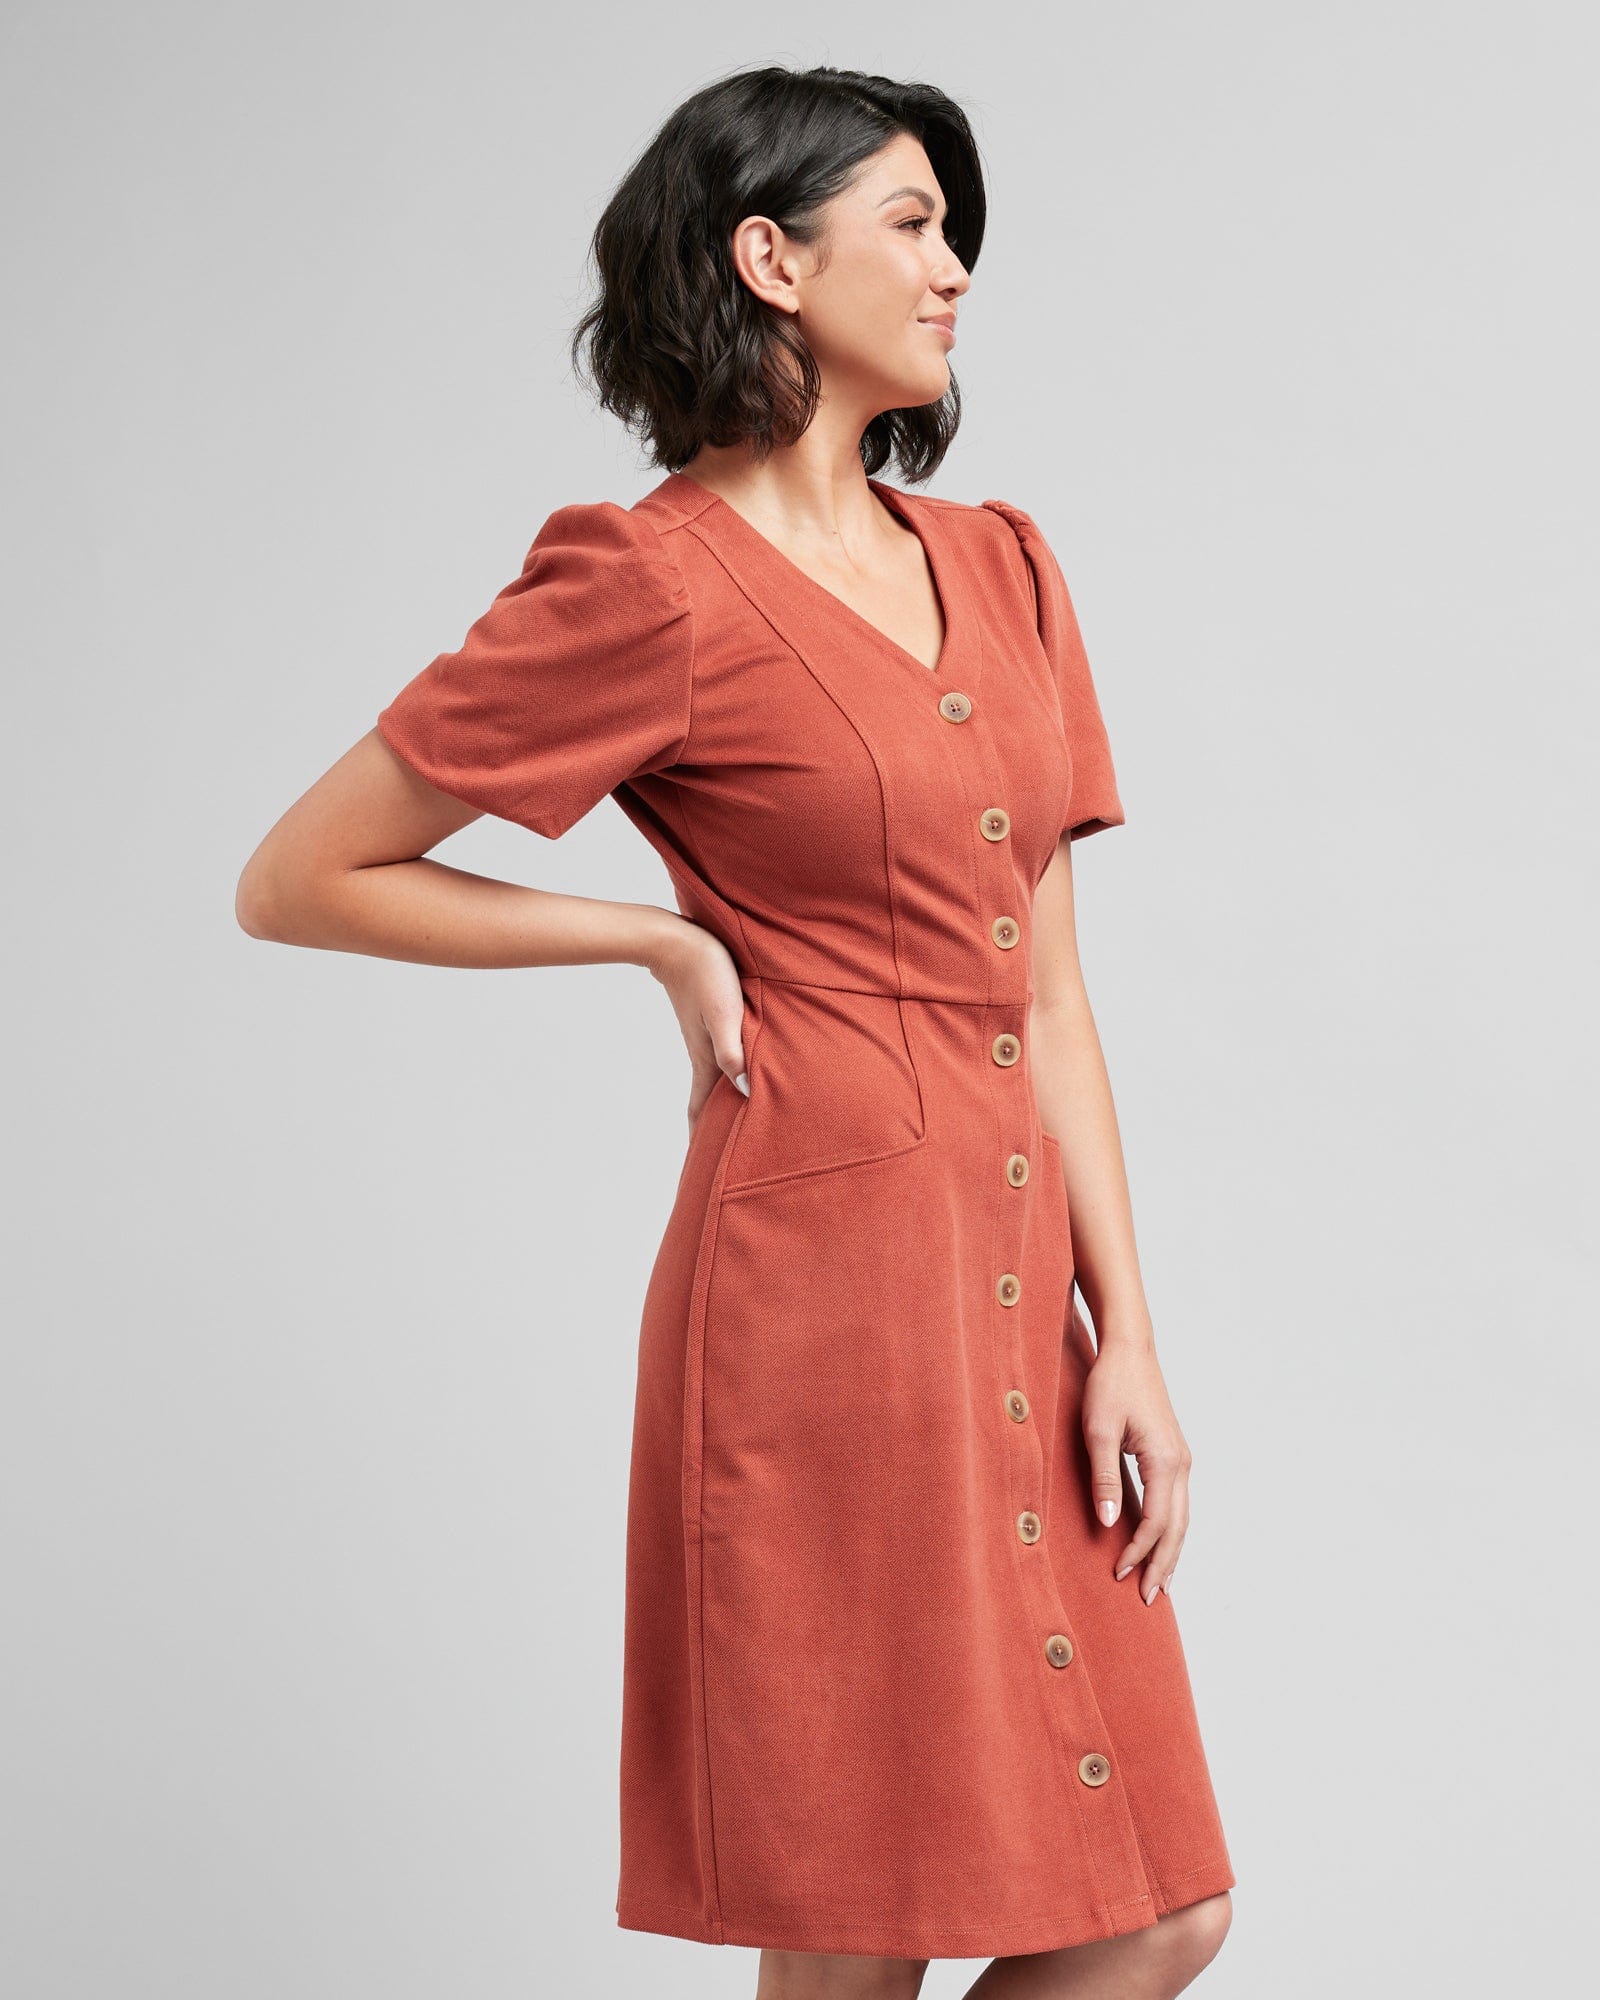 Woman in a short sleeve, v-neck, button-down, orange dress